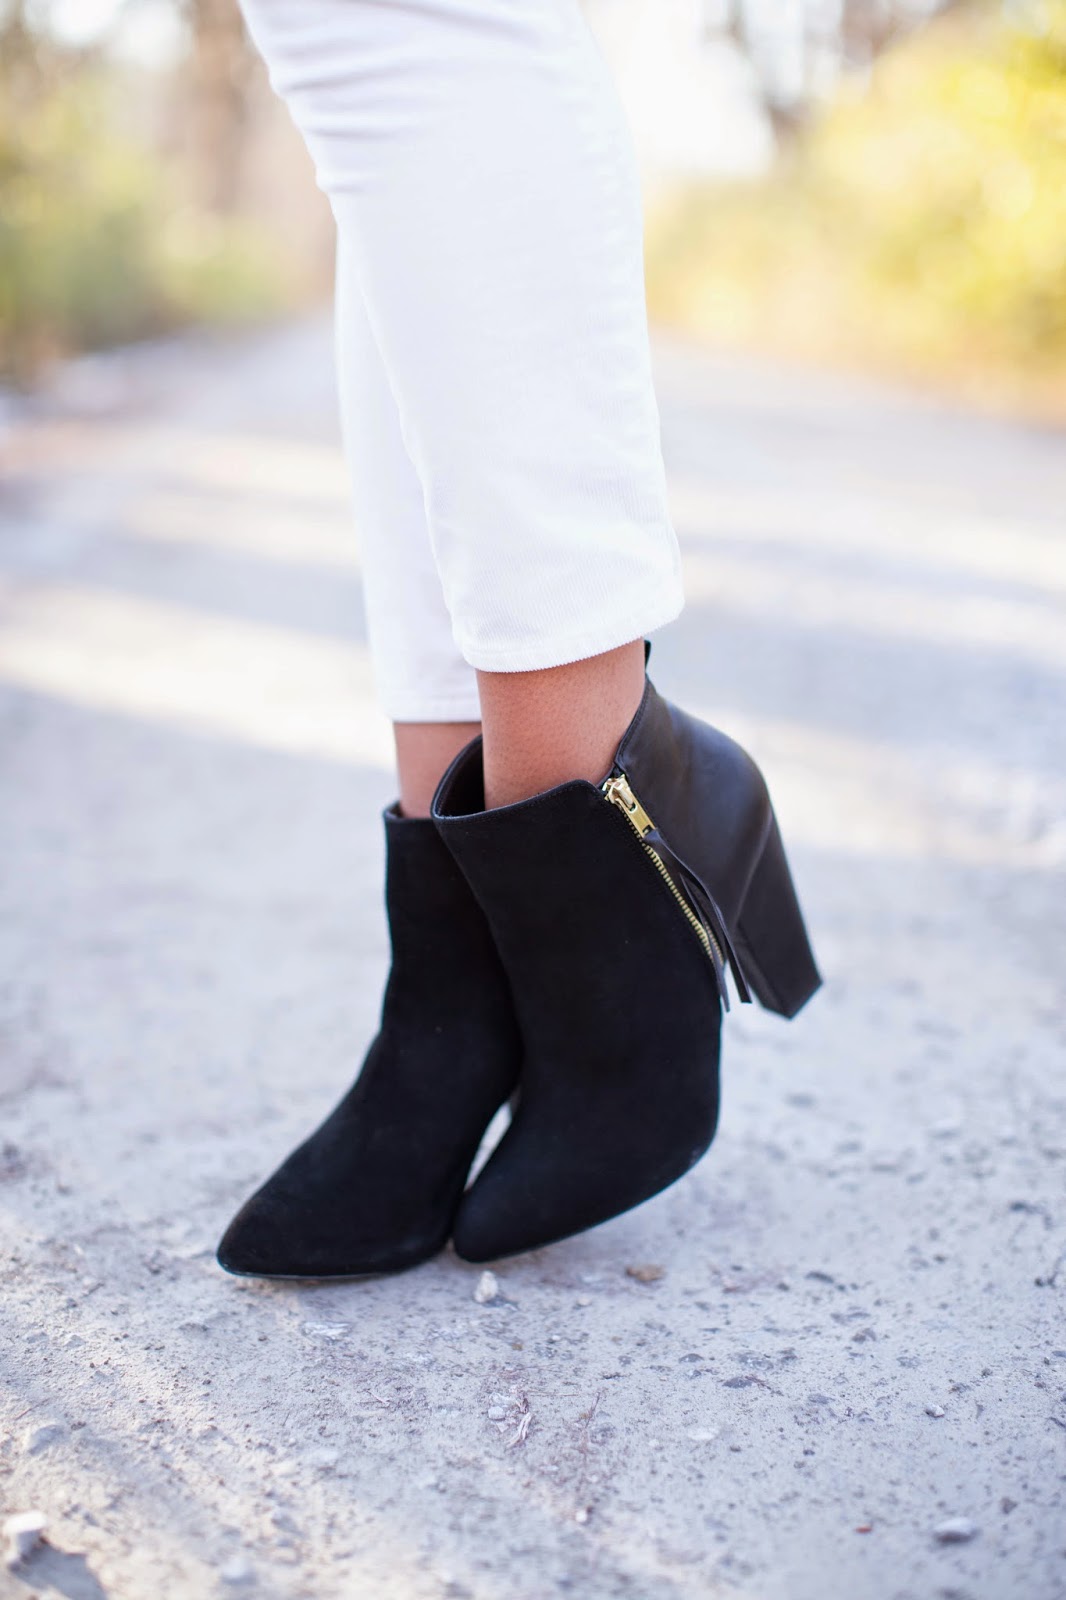 Little Black Boots | A Southern Drawl